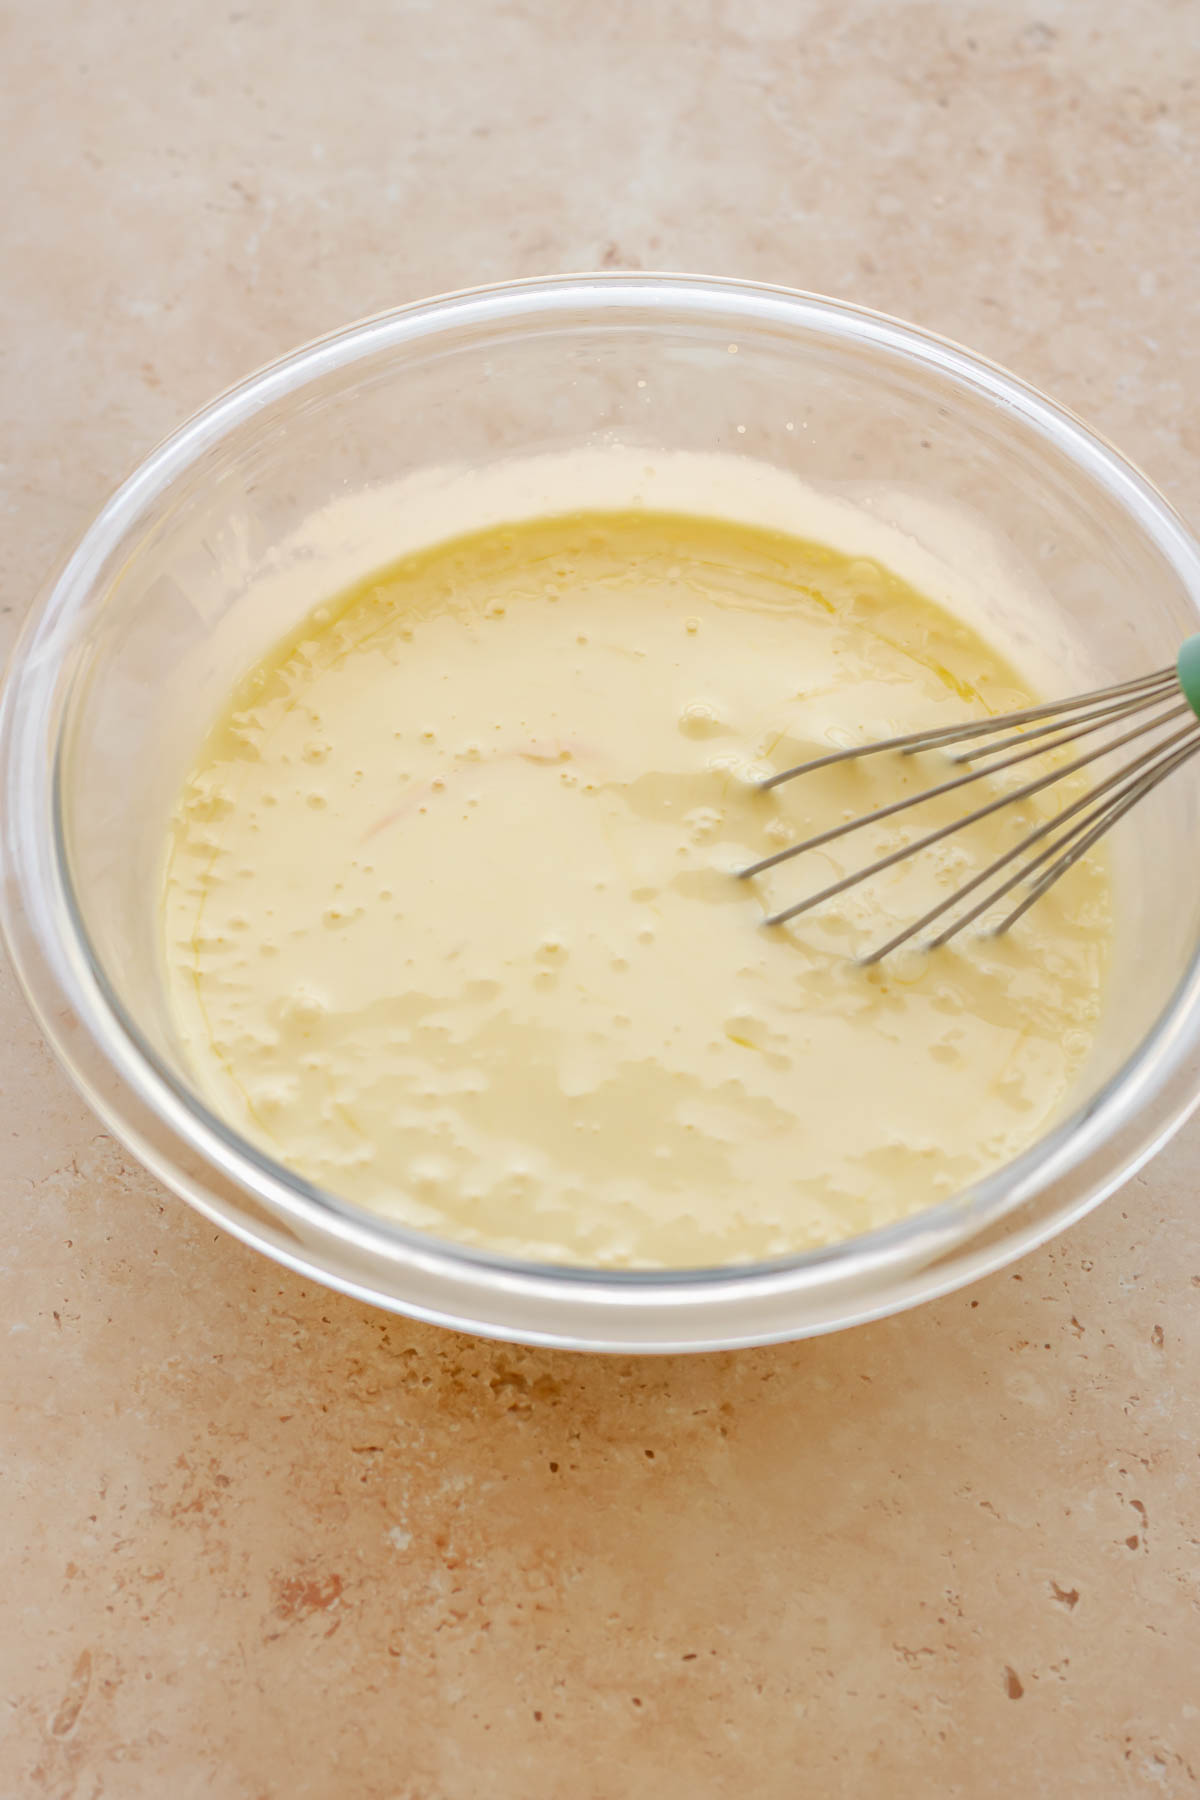 Egg custard whisked in a mixing bowl.